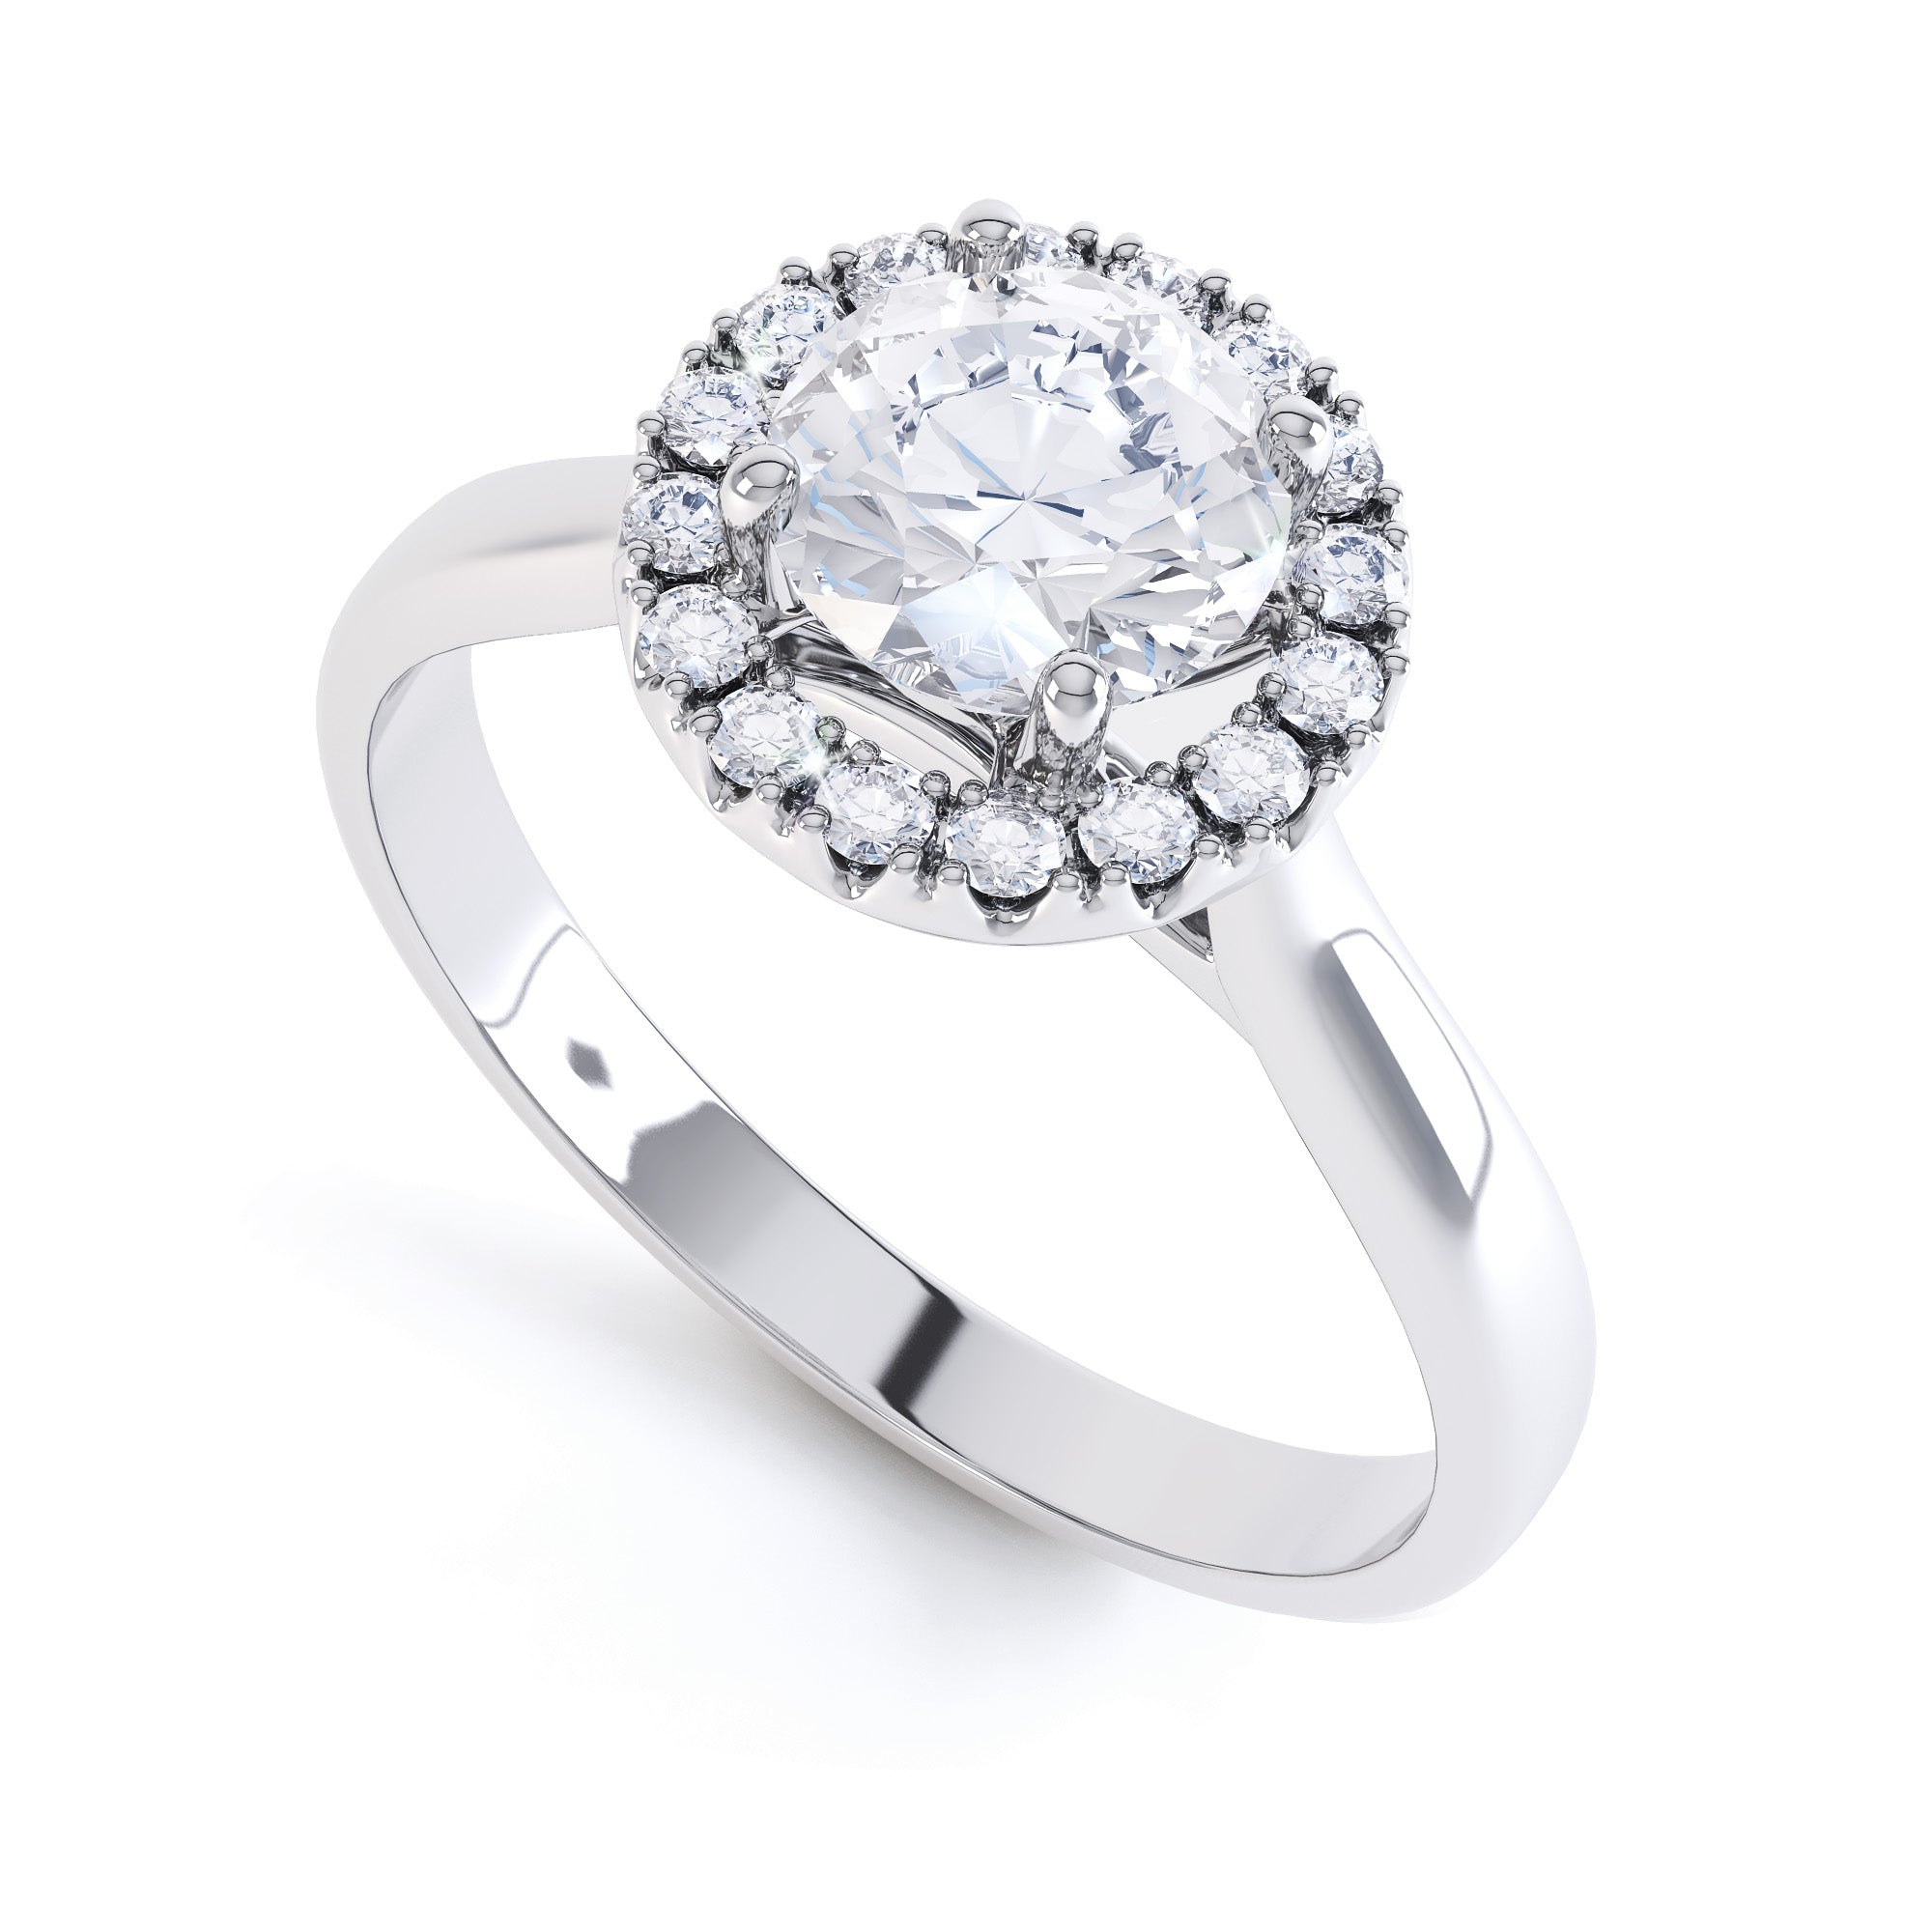 Round Brilliant Cut Centre Stone, Four Claw, Halo, Diamond Engagement Ring